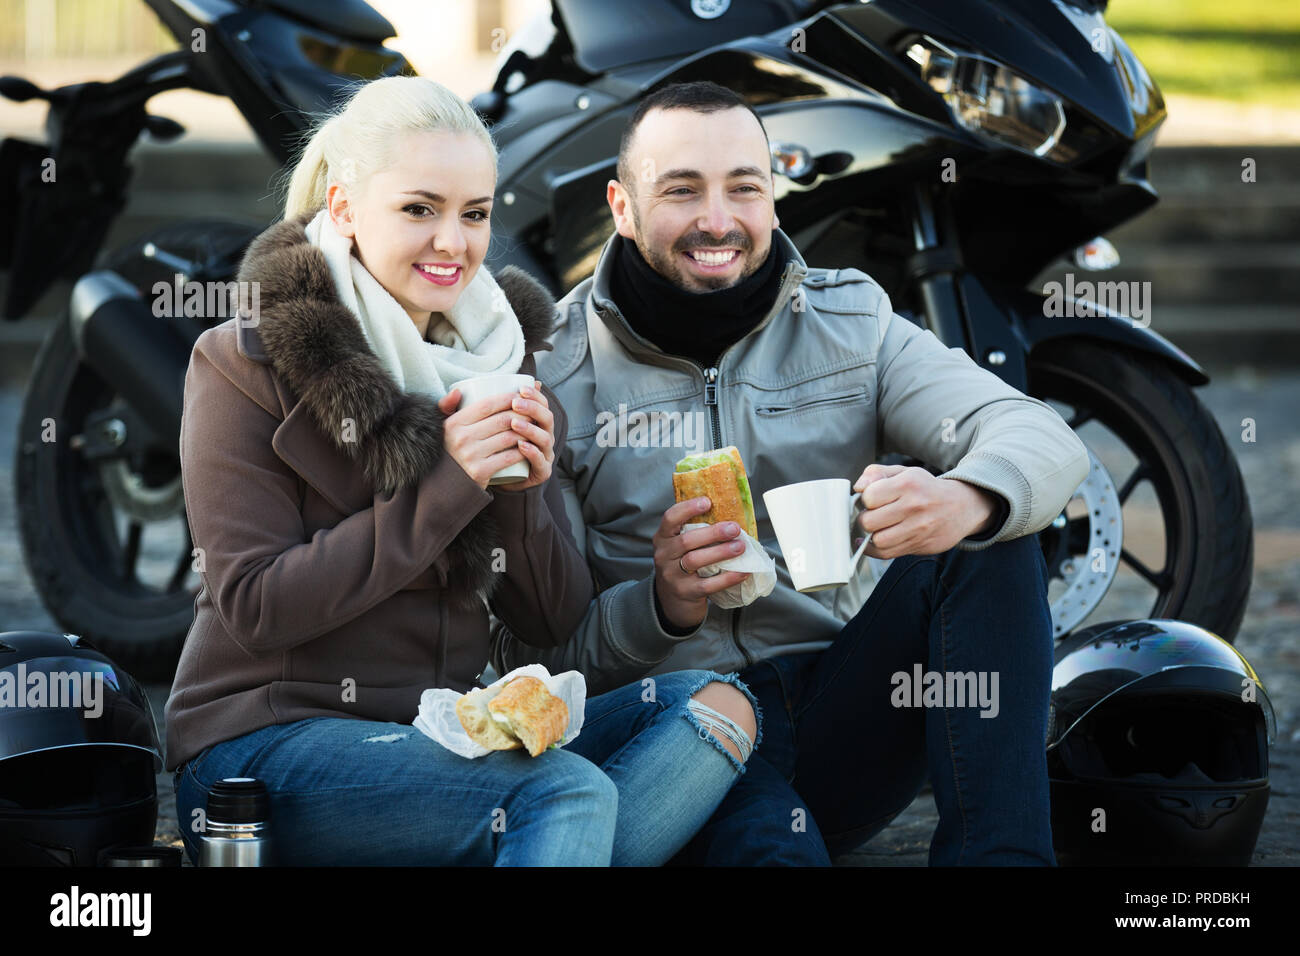 Young couple riding bikes and having fun in the city - Stock Image -  Everypixel